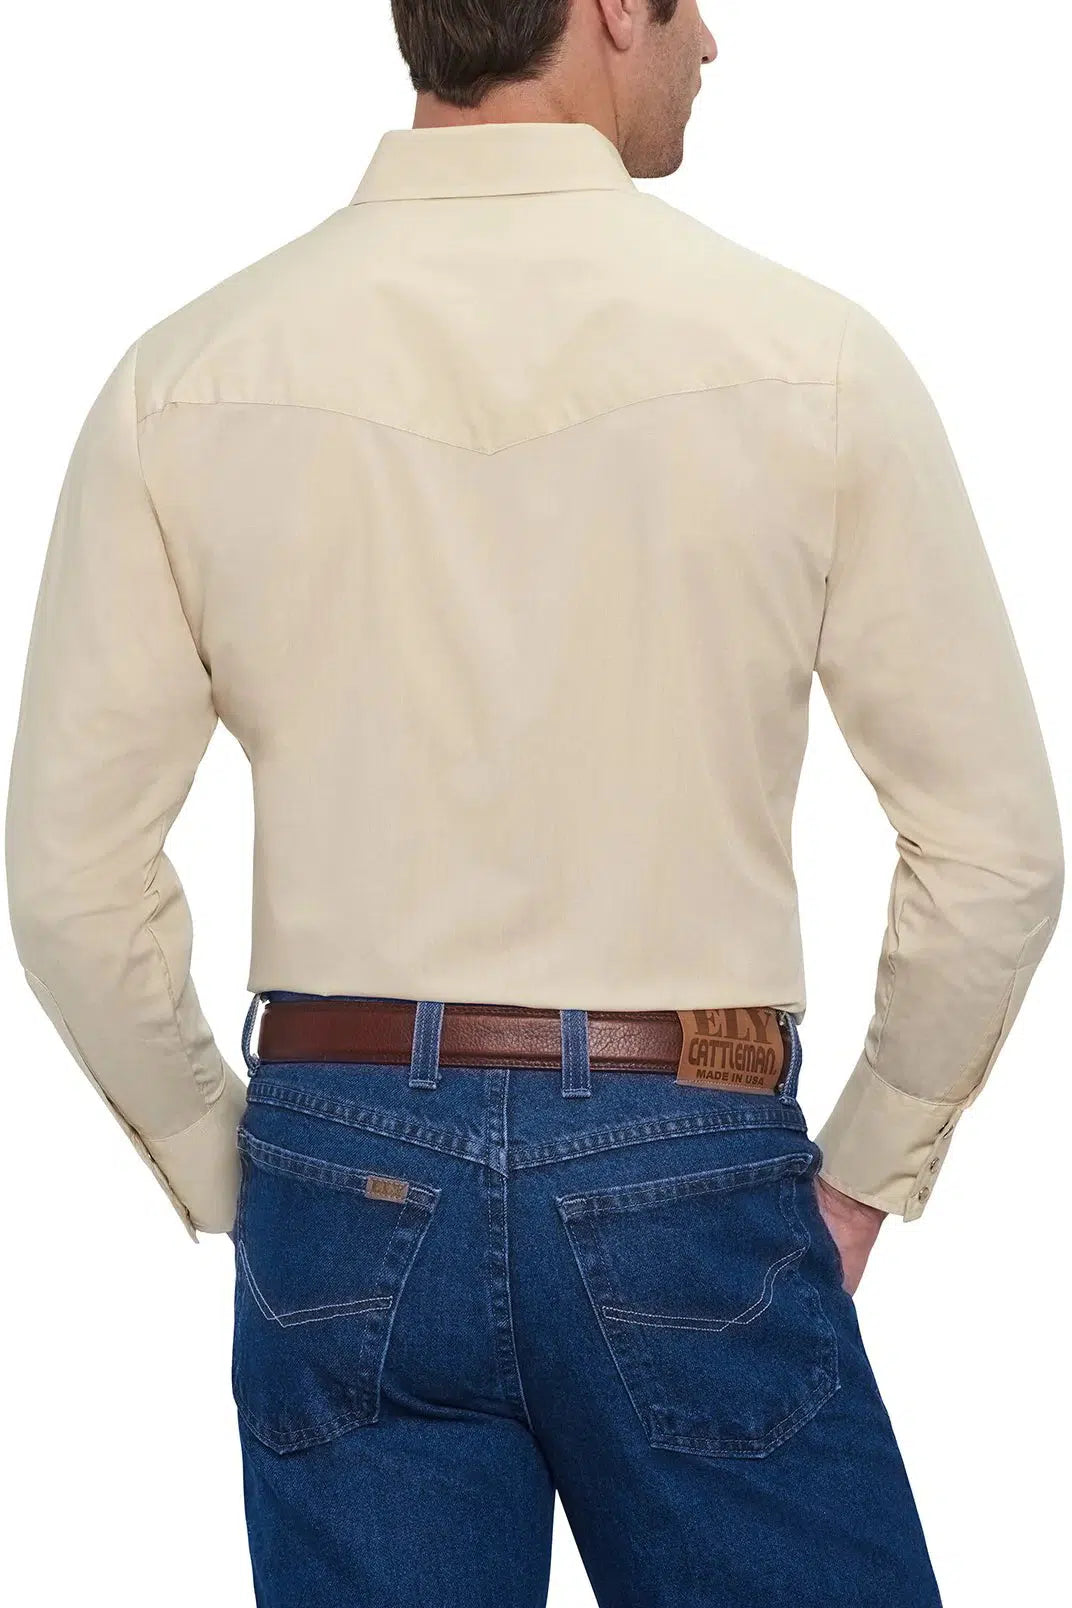 The back of a man wearing jeans and a tan shirt with ELY Mens Long Sleeve Solid Western Snap Solid Shirt.